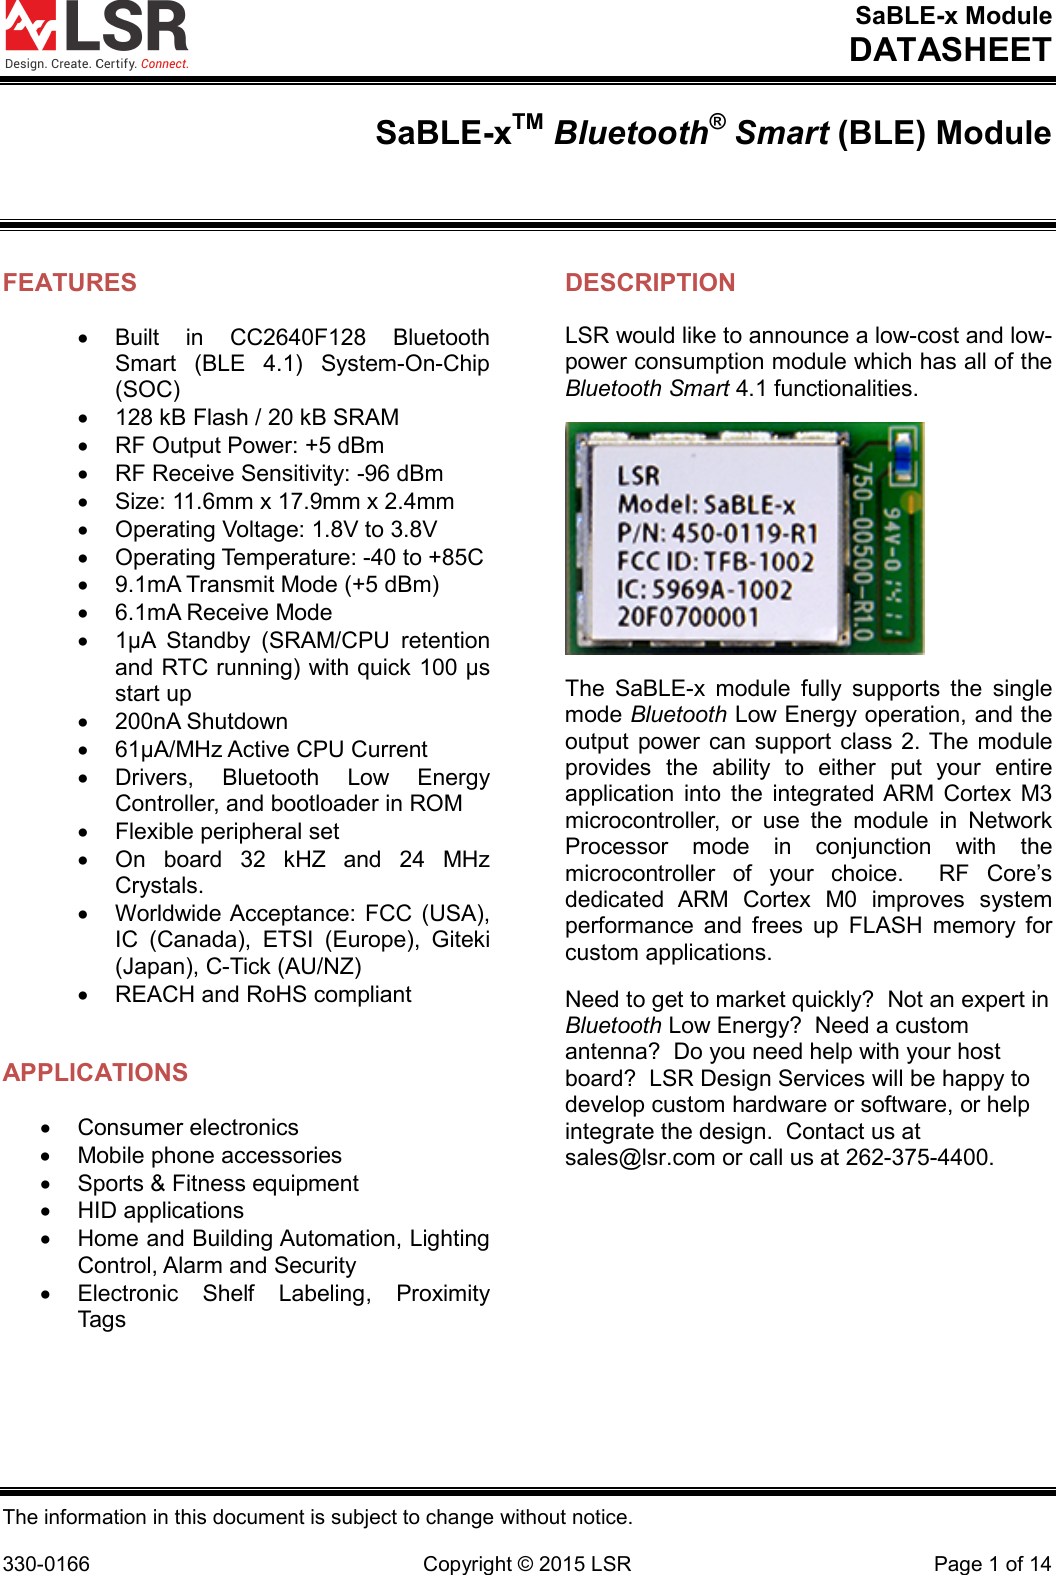 SaBLE-x Module DATASHEET  The information in this document is subject to change without notice.  330-0166 Copyright © 2015 LSR Page 1 of 14 SaBLE-xTM Bluetooth® Smart (BLE) Module  FEATURES • Built in CC2640F128 Bluetooth Smart (BLE 4.1) System-On-Chip (SOC) • 128 kB Flash / 20 kB SRAM • RF Output Power: +5 dBm • RF Receive Sensitivity: -96 dBm • Size: 11.6mm x 17.9mm x 2.4mm • Operating Voltage: 1.8V to 3.8V • Operating Temperature: -40 to +85C • 9.1mA Transmit Mode (+5 dBm)  • 6.1mA Receive Mode •  1μA  Standby  (SRAM/CPU retention and RTC running) with quick 100 μs start up •  200nA Shutdown • 61μA/MHz Active CPU Current • Drivers, Bluetooth Low Energy Controller, and bootloader in ROM • Flexible peripheral set • On board 32 kHZ and 24 MHz Crystals. • Worldwide Acceptance: FCC (USA), IC (Canada), ETSI (Europe), Giteki (Japan), C-Tick (AU/NZ) • REACH and RoHS compliant  APPLICATIONS • Consumer electronics • Mobile phone accessories • Sports &amp; Fitness equipment • HID applications • Home and Building Automation, Lighting Control, Alarm and Security • Electronic Shelf Labeling, Proximity Tags DESCRIPTION LSR would like to announce a low-cost and low-power consumption module which has all of the Bluetooth Smart 4.1 functionalities.  The  SaBLE-x  module  fully supports the single mode Bluetooth Low Energy operation, and the output power can support class 2. The module provides  the ability to either put your entire application into the integrated ARM Cortex M3 microcontroller, or use the module in Network Processor mode in conjunction with the microcontroller of your choice.  RF Core’s dedicated ARM Cortex M0 improves system performance and frees up FLASH memory for custom applications. Need to get to market quickly?  Not an expert in Bluetooth Low Energy?  Need a custom antenna?  Do you need help with your host board?  LSR Design Services will be happy to develop custom hardware or software, or help integrate the design.  Contact us at sales@lsr.com or call us at 262-375-4400.    